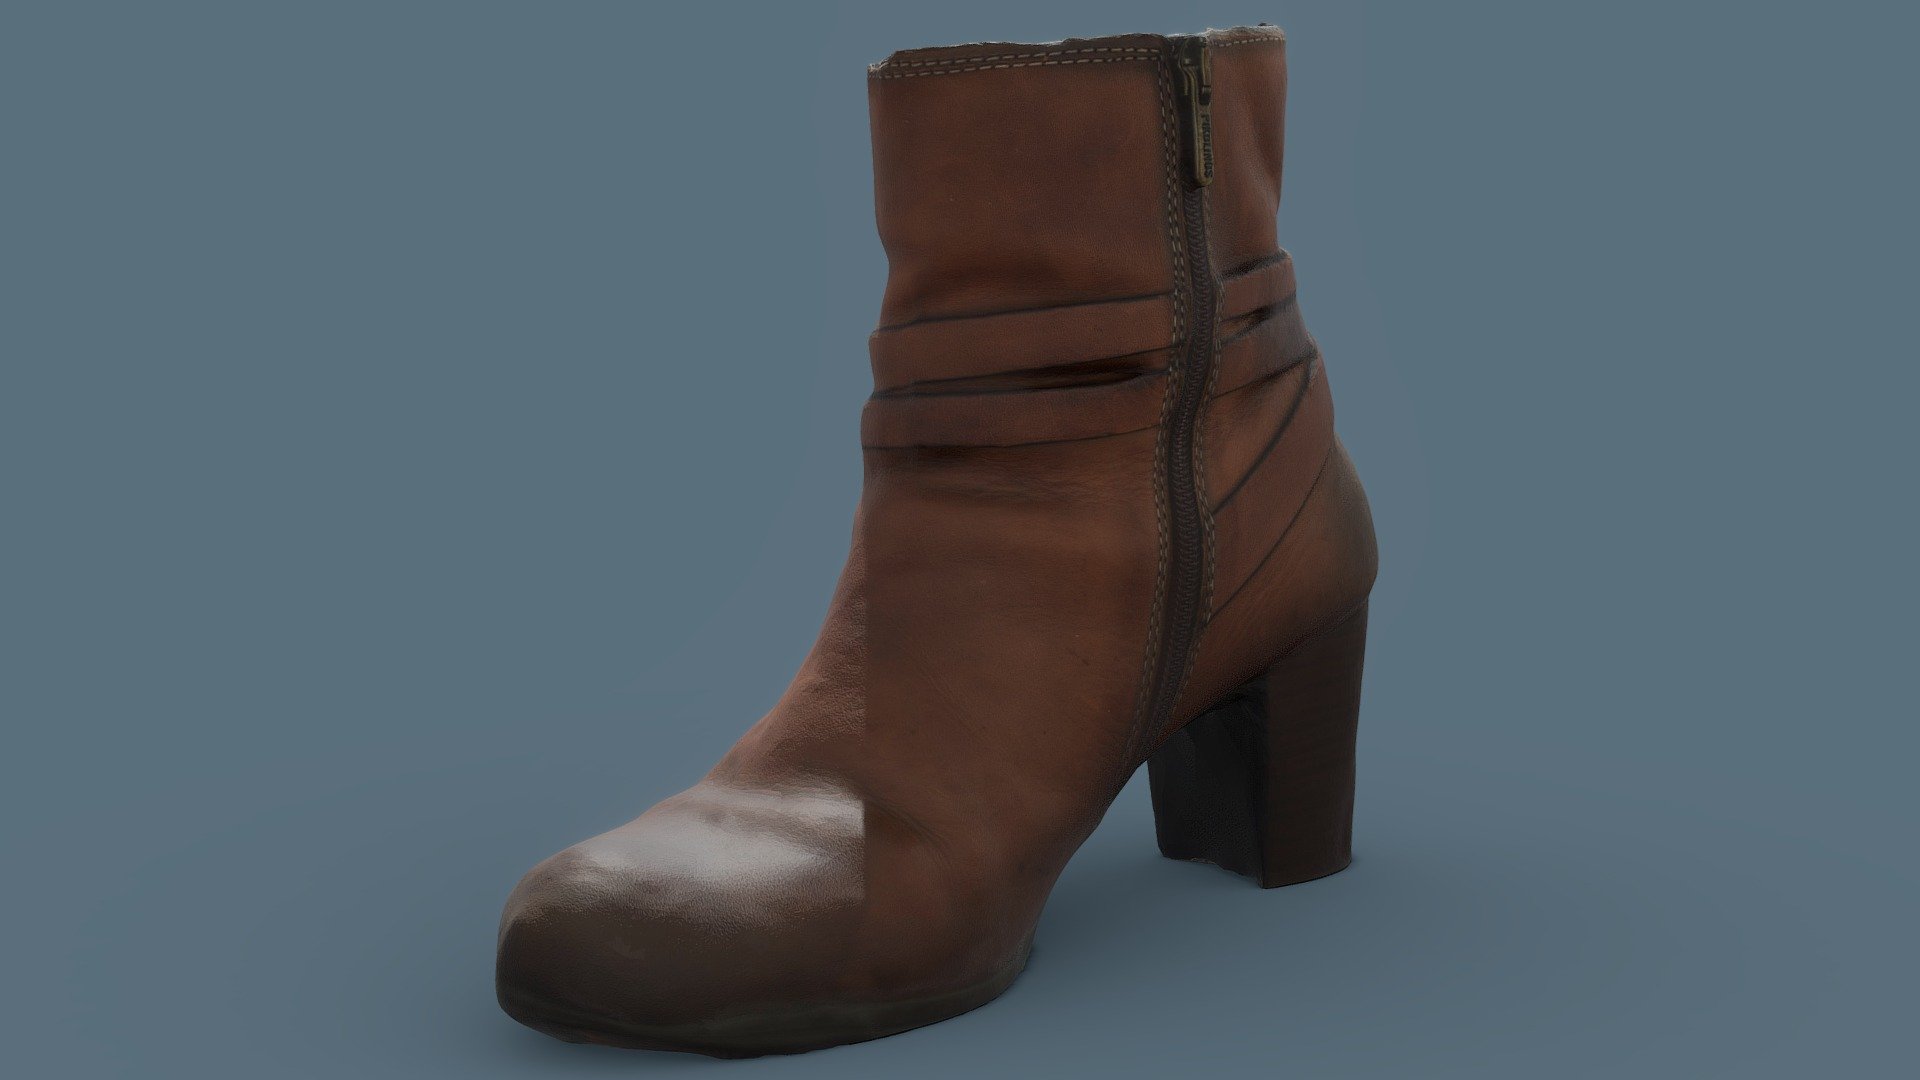 Photogrammetry scan of leather ankle boots

With PBR textures 

Scan taken with a Sony a7sii

Thanks for lending me your boots Amanda Sonnenschein! 

austinbeaulier.com - Leather Ankle Boot Scan - Buy Royalty Free 3D model by Austin Beaulier (@Austin.Beaulier) 3d model